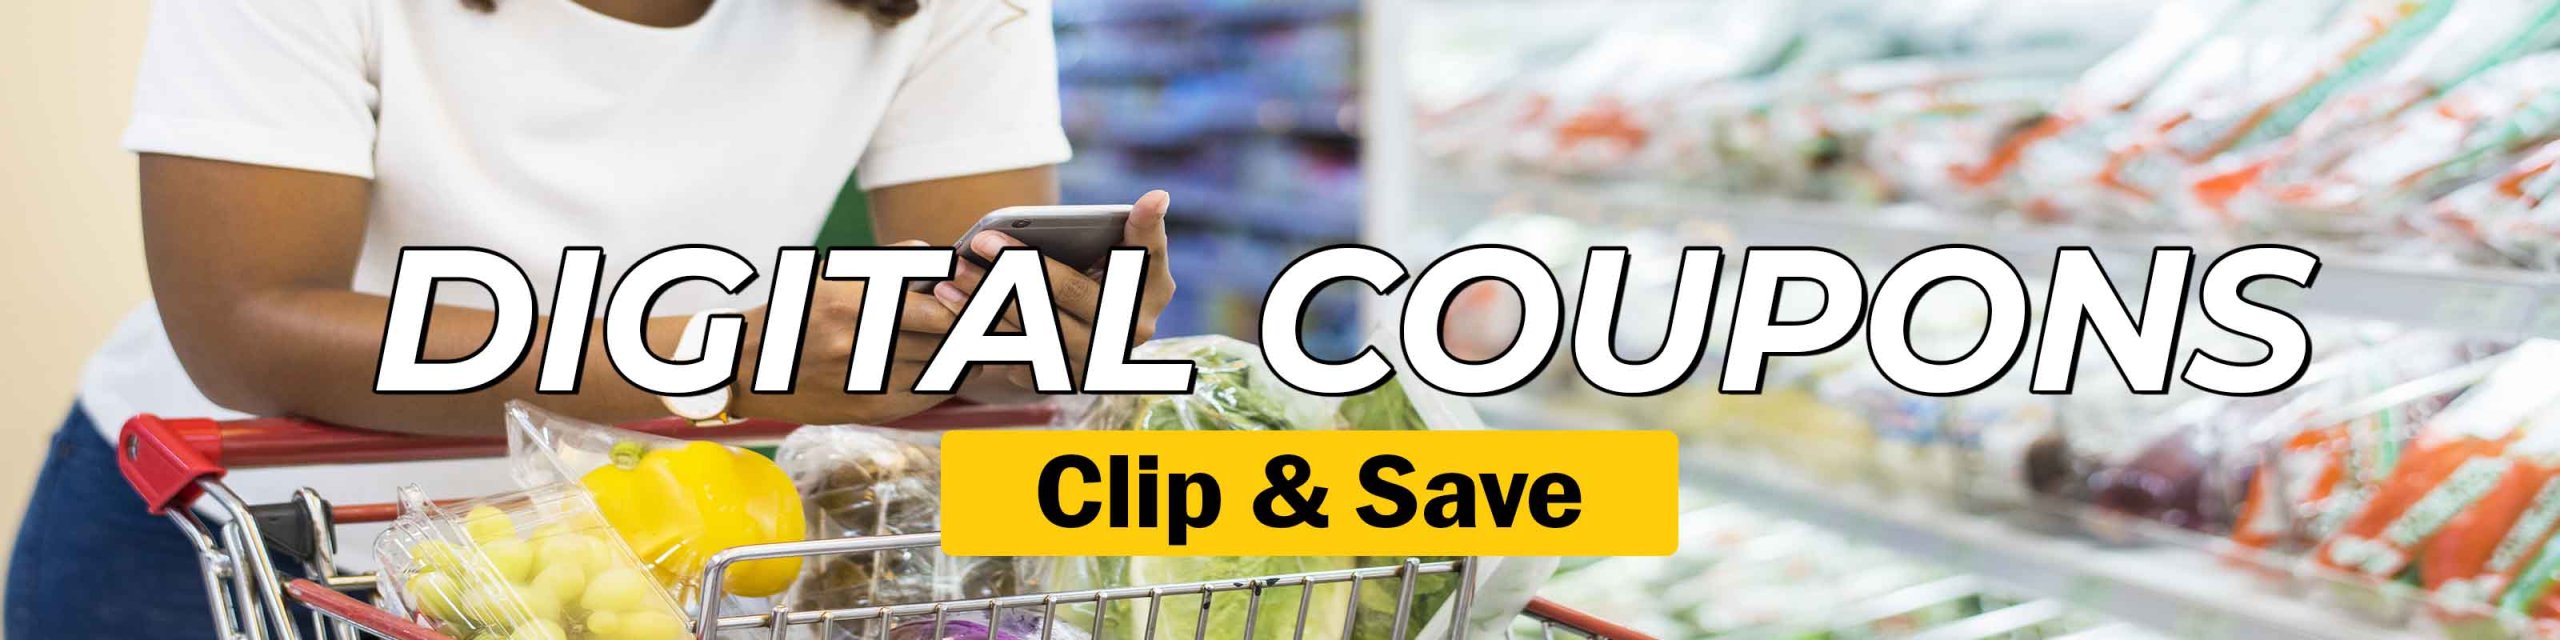 Save more with Digital Coupons